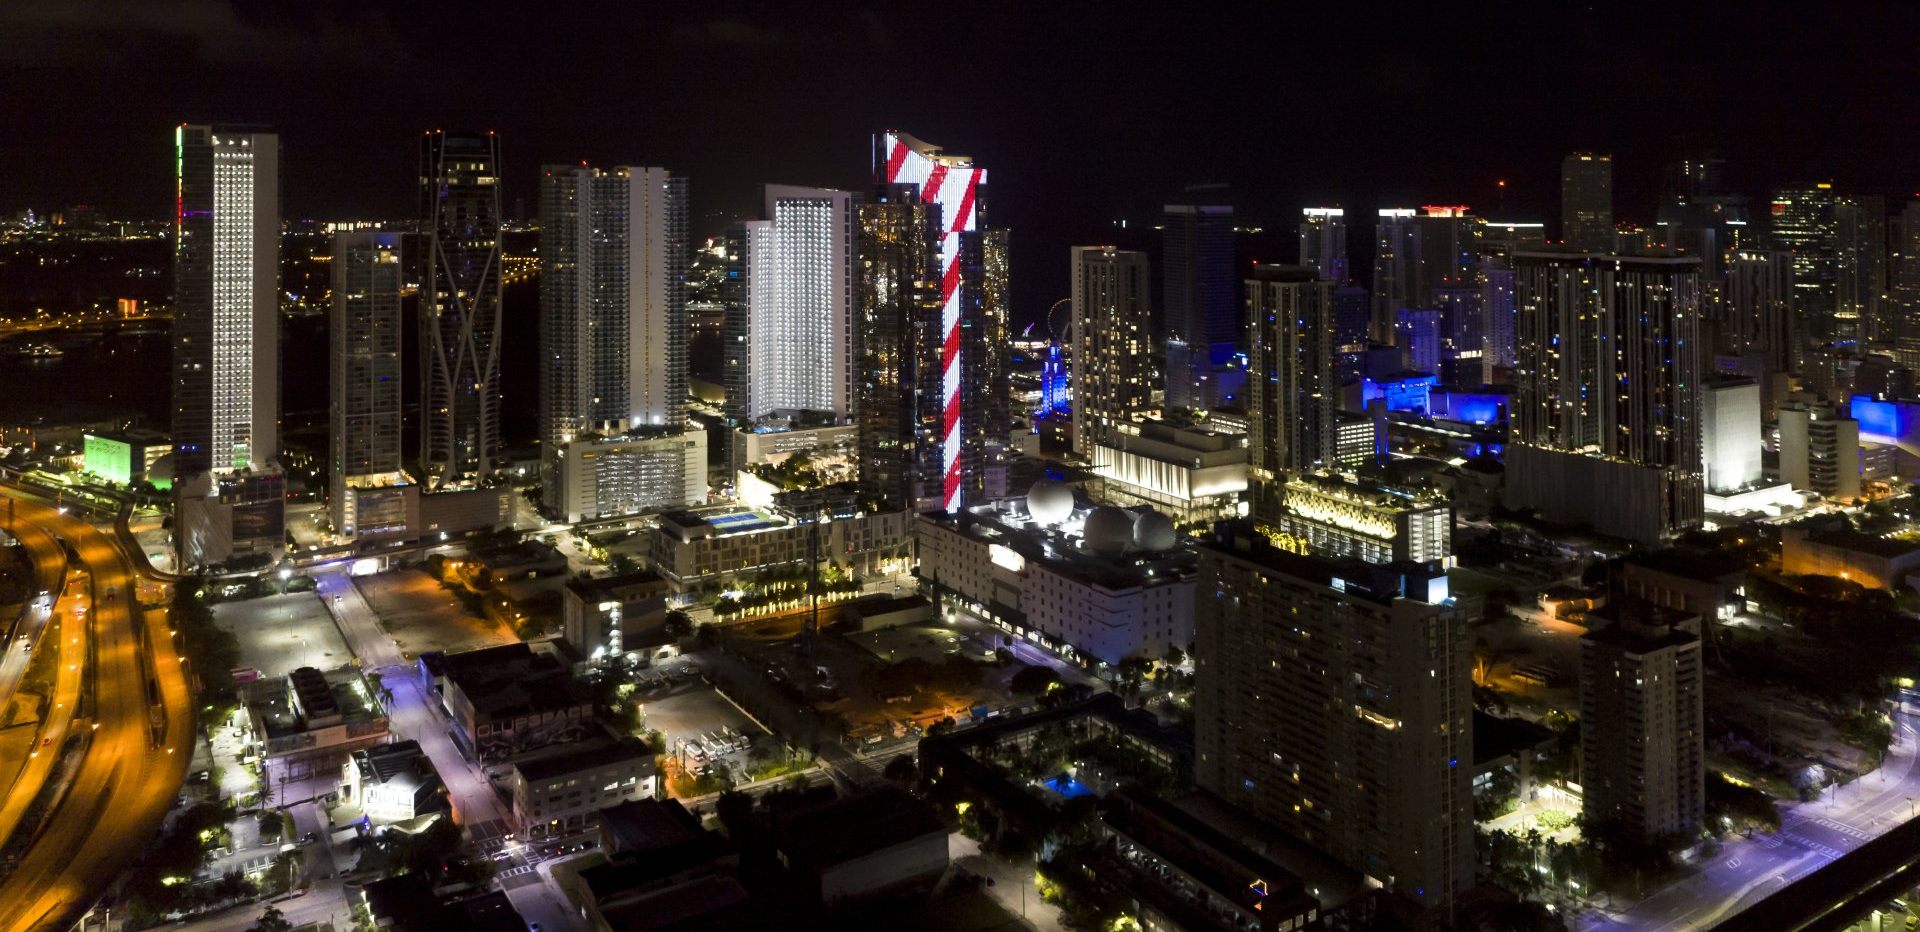 World’s Tallest Digital “Merry Christmas” Candy Cane: world record in Miami, Florida World’s Tallest Digital “Merry Christmas” Candy Cane: world record in Miami, Florida